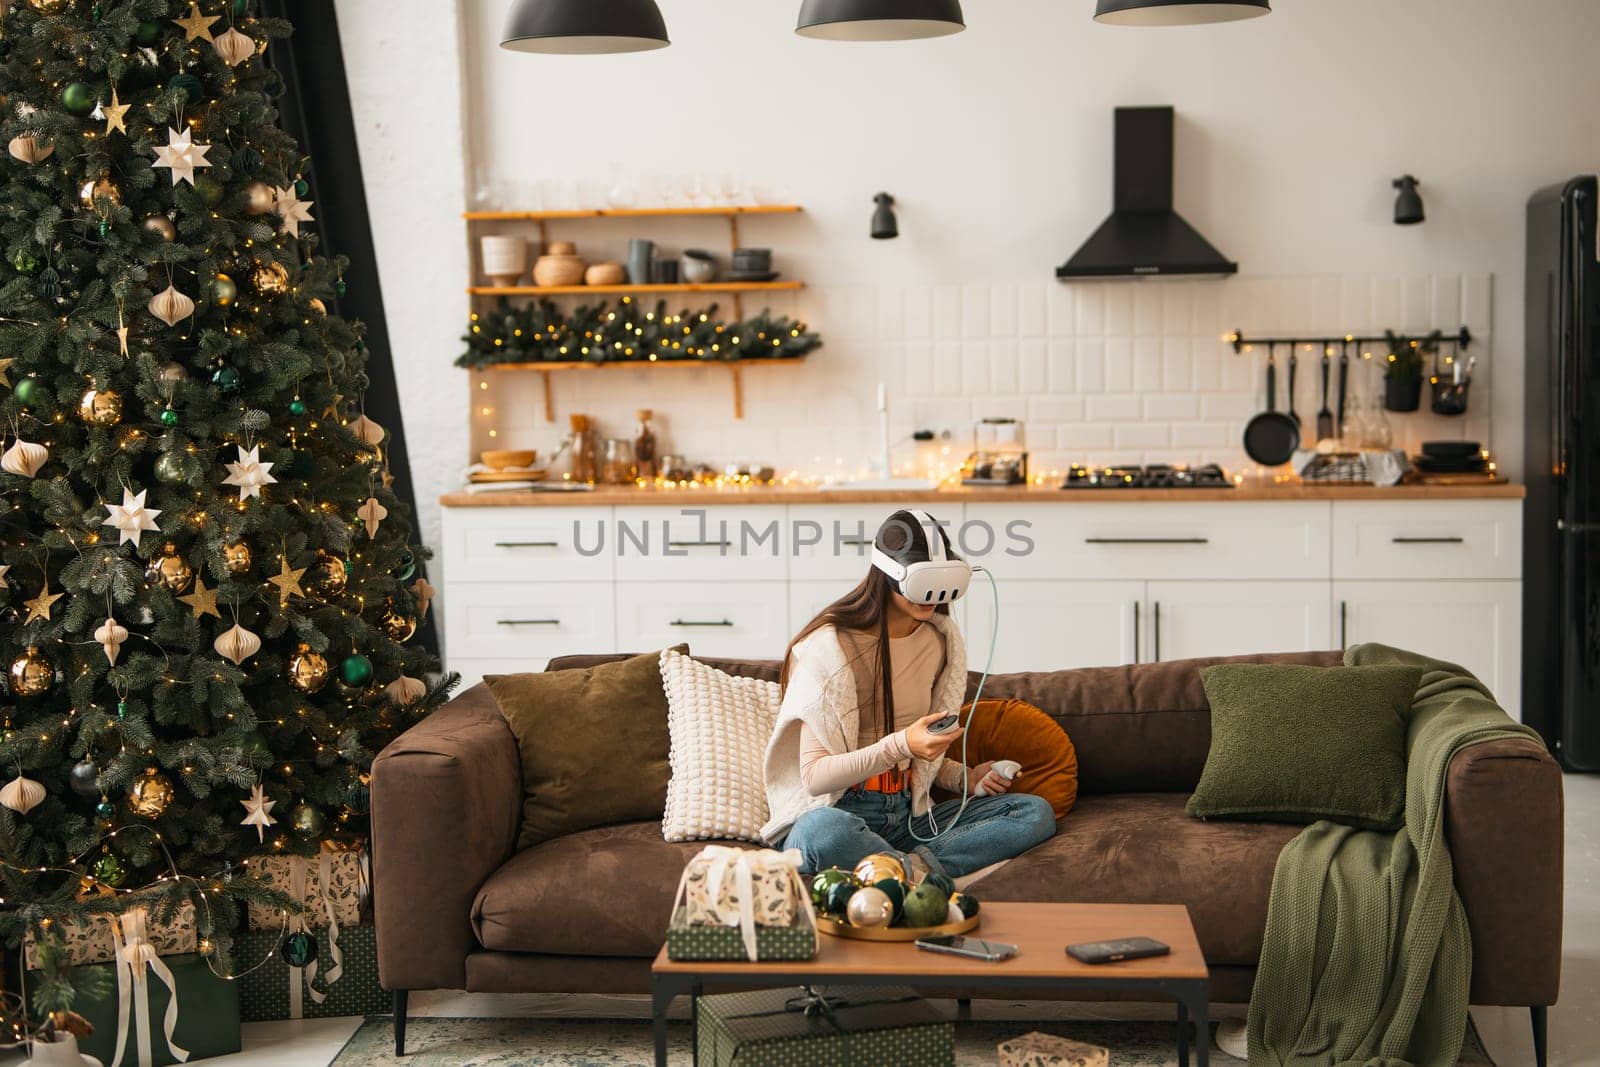 Amidst a warm Christmas ambiance at her place, a stylish young woman is seen in a virtual reality headset. High quality photo